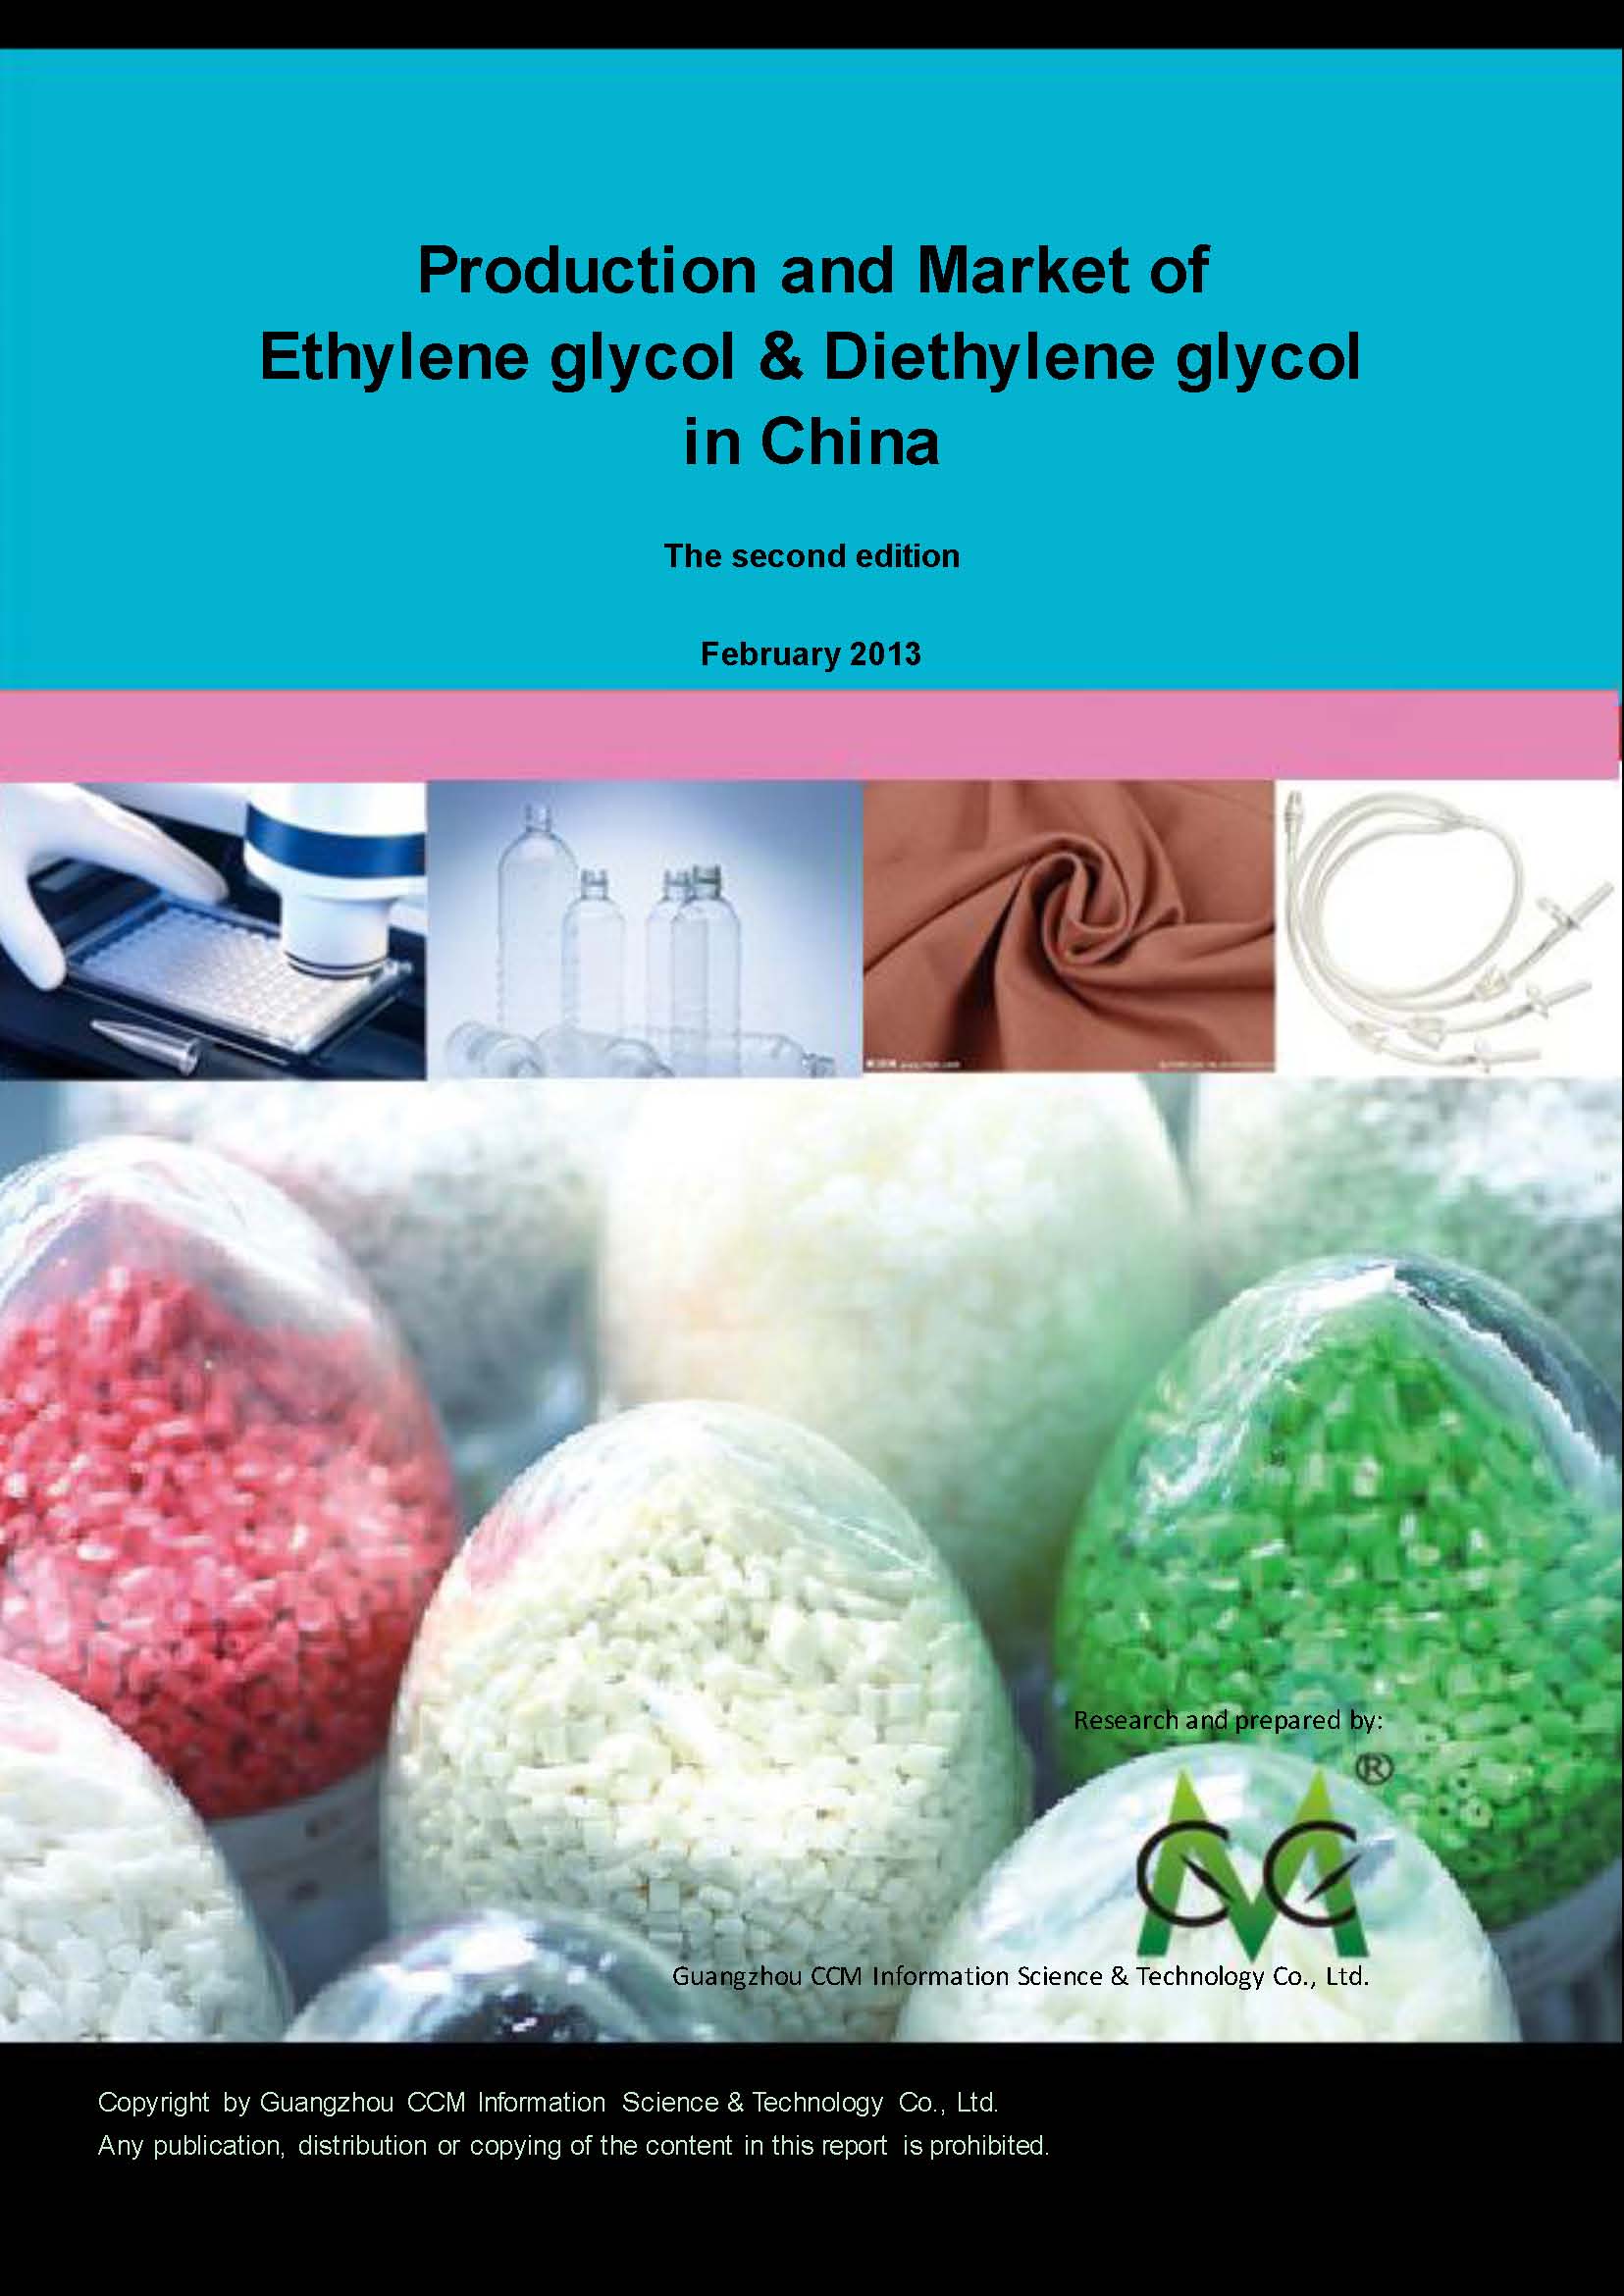 Production and Market of Ethylene Glycol and Diethylene Glycol in China